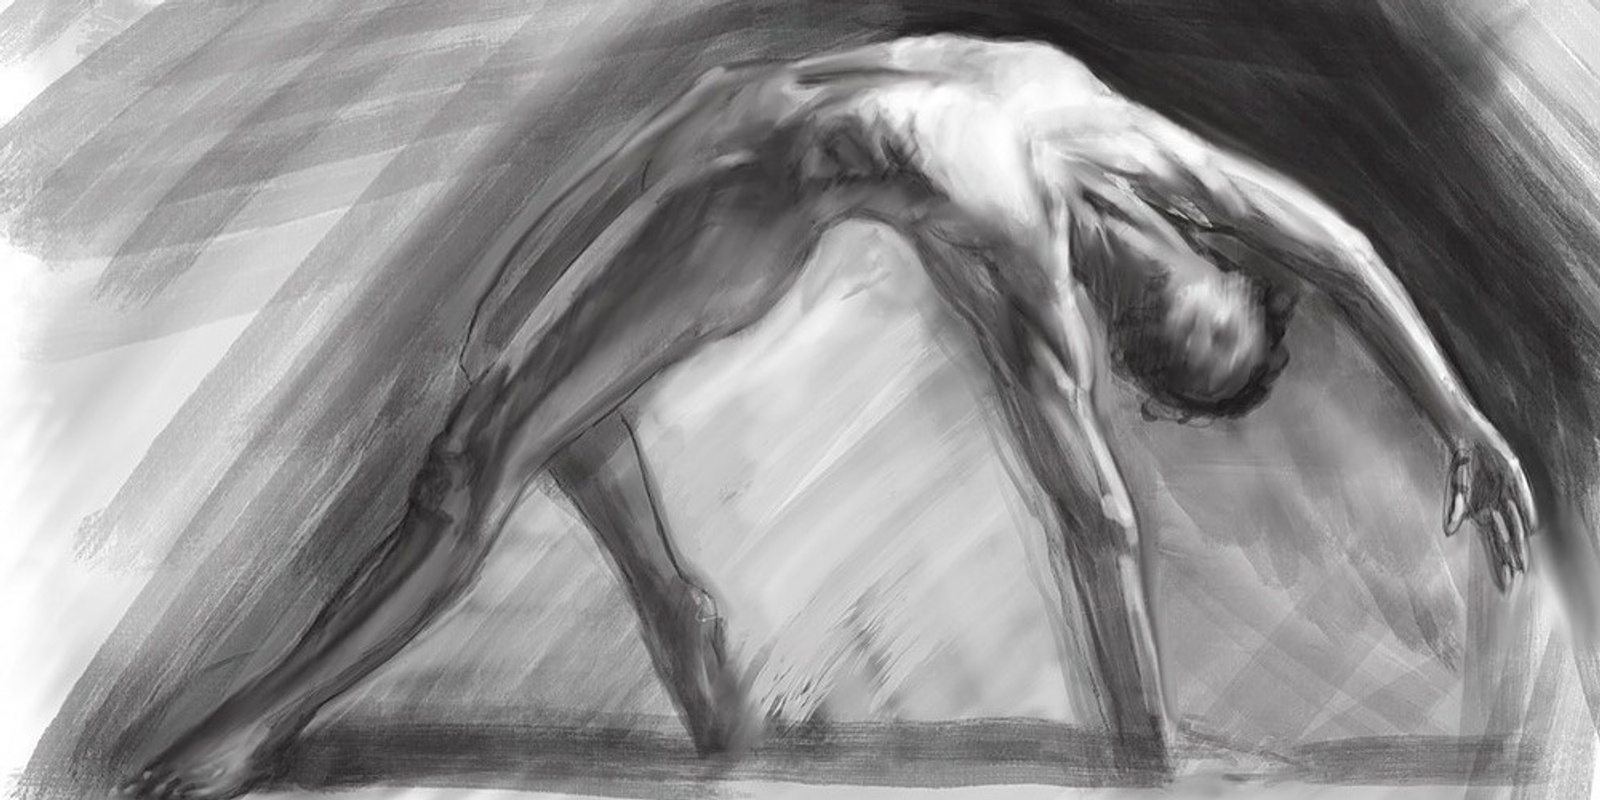 How to Sketch the Human Body with Charcoal